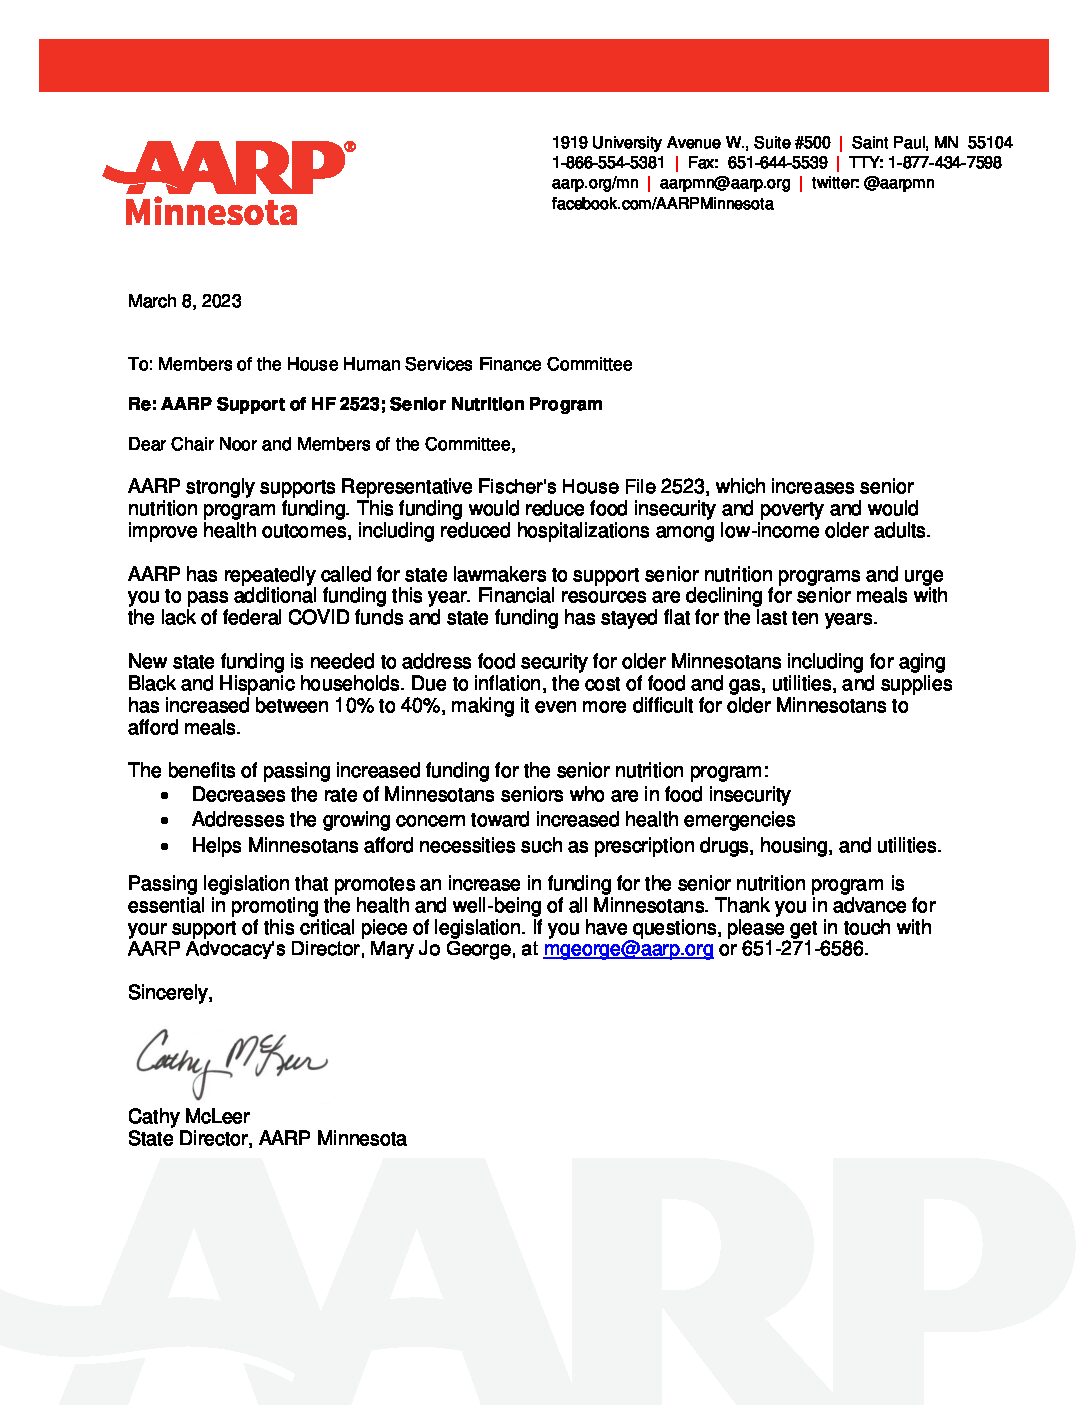 Letter of support from AARP